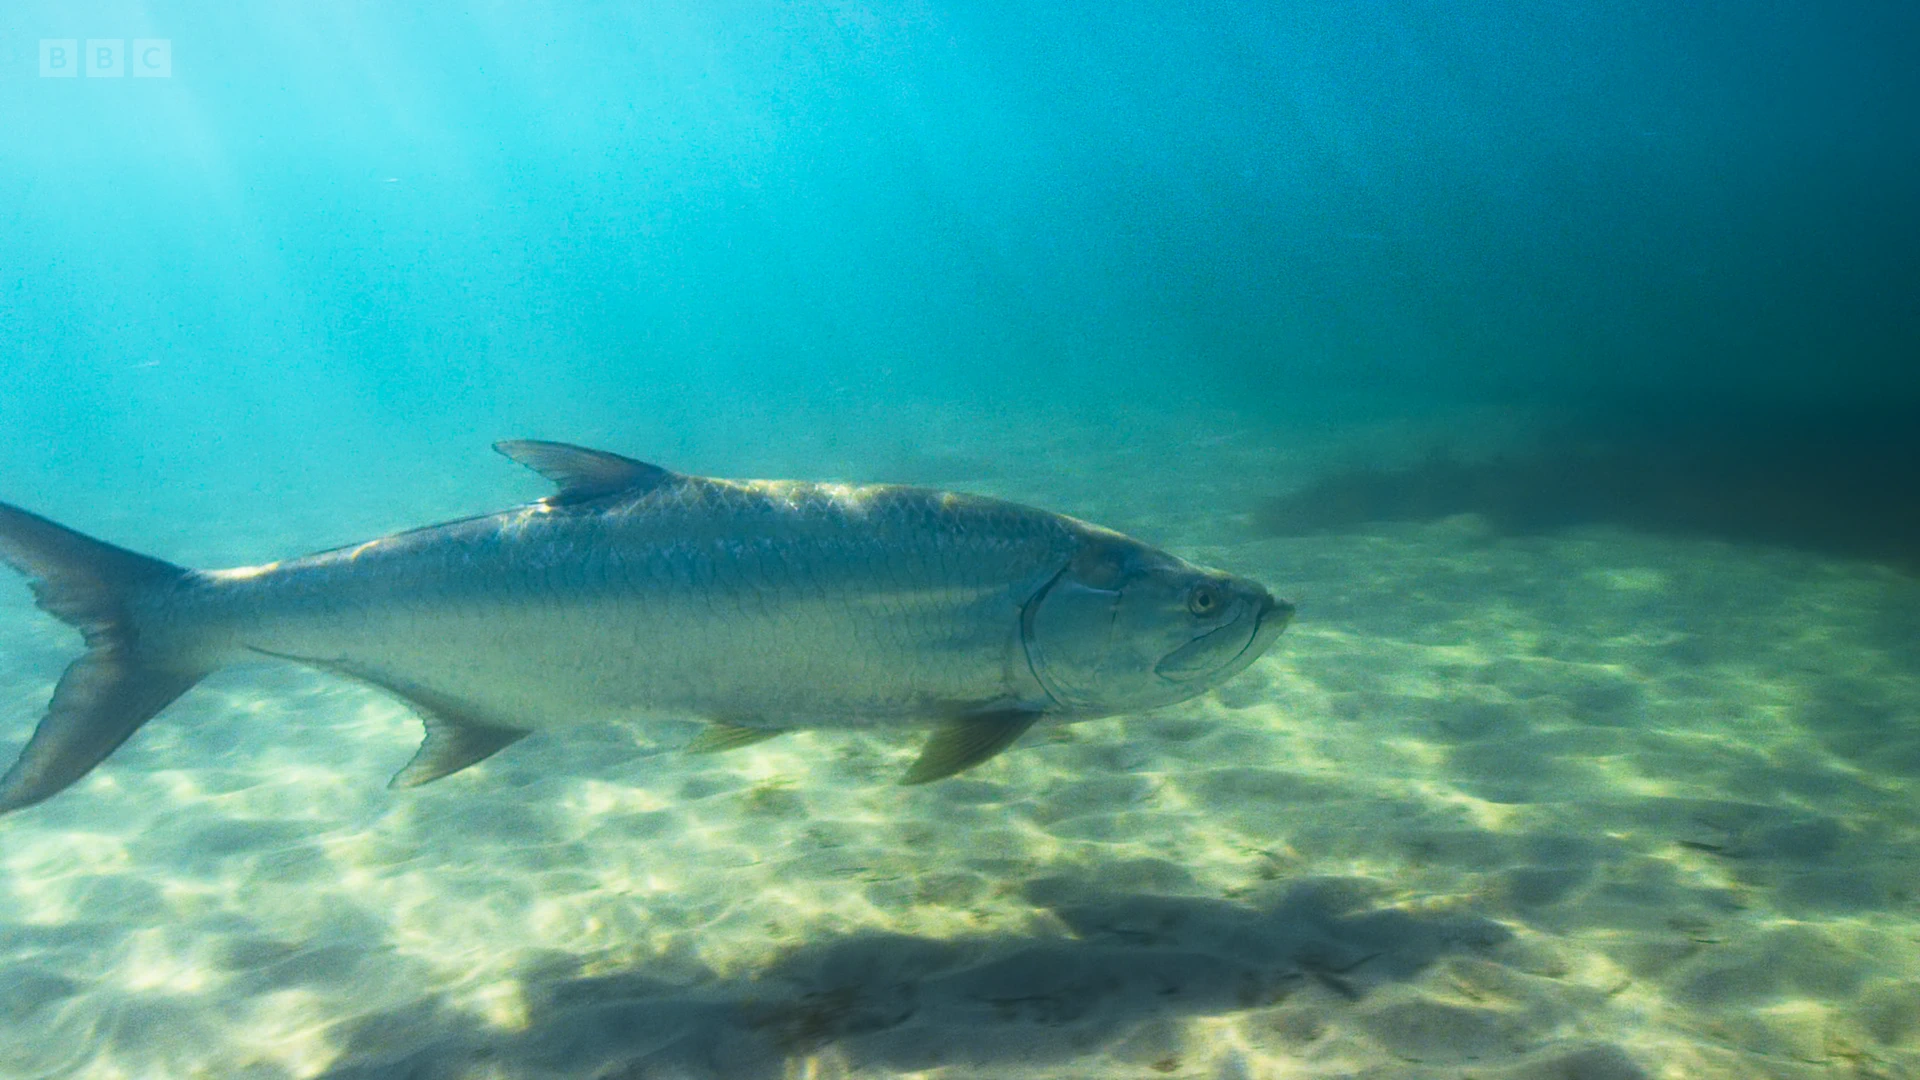 Atlantic tarpon (Megalops atlanticus) as shown in Seven Worlds, One Planet - North America